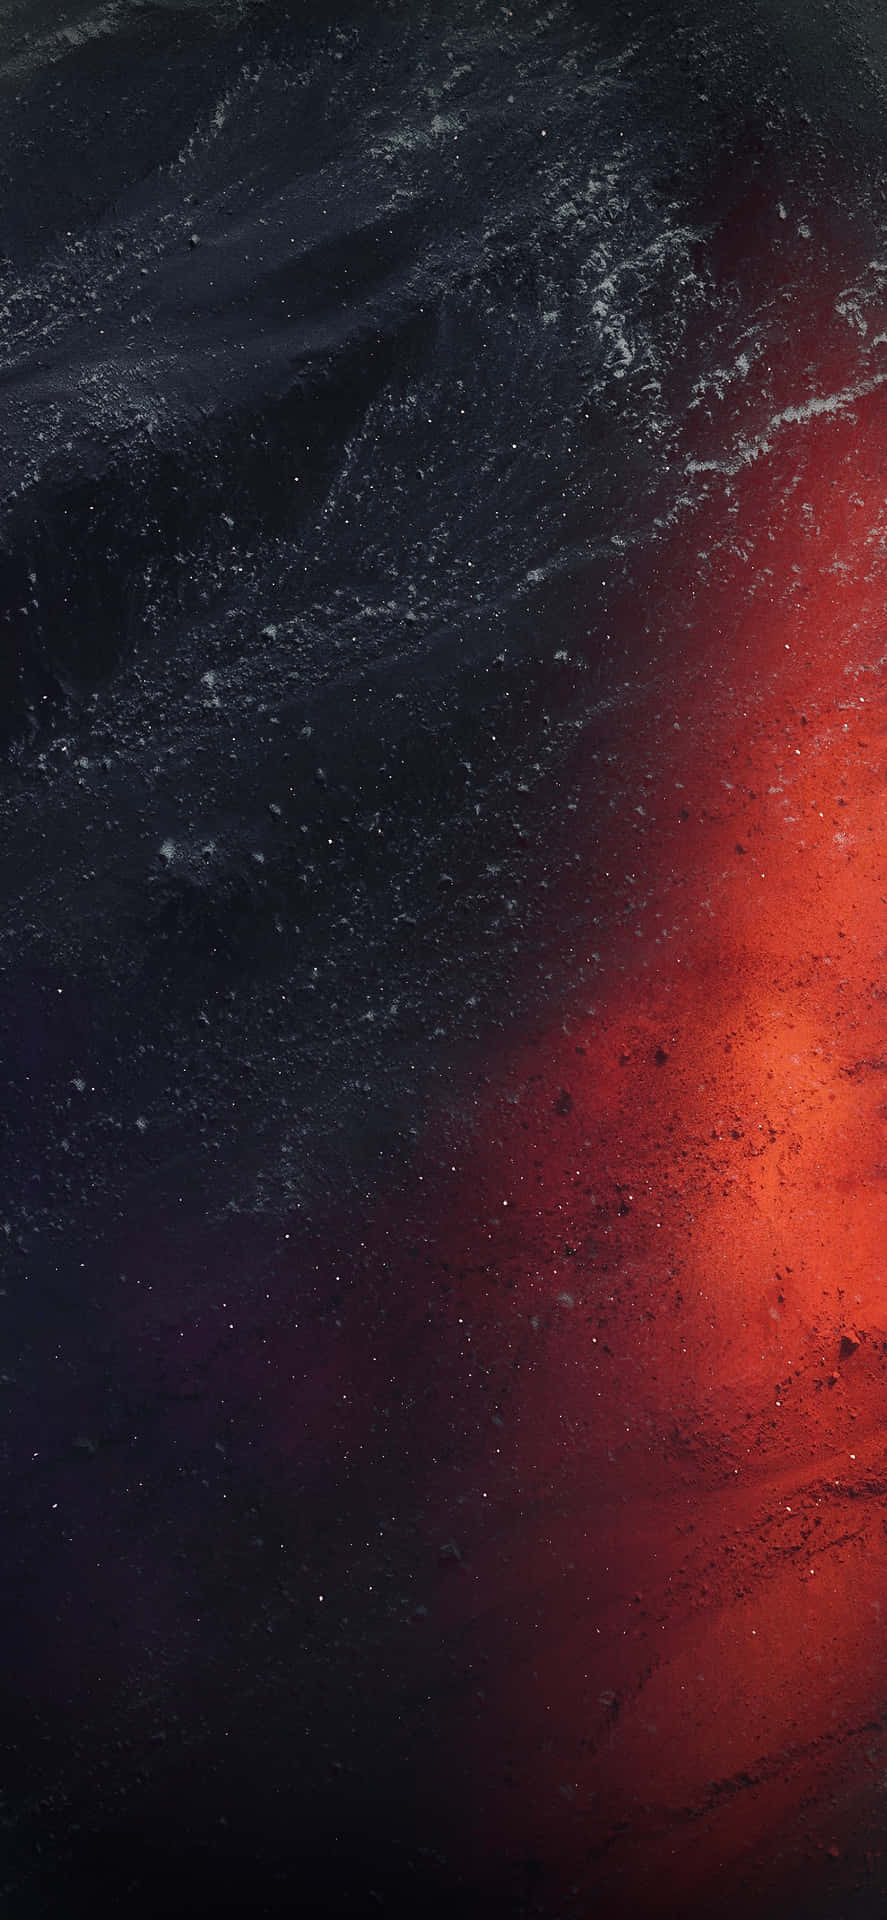 Take A Celestial Journey With Iphone Xr Space. Wallpaper